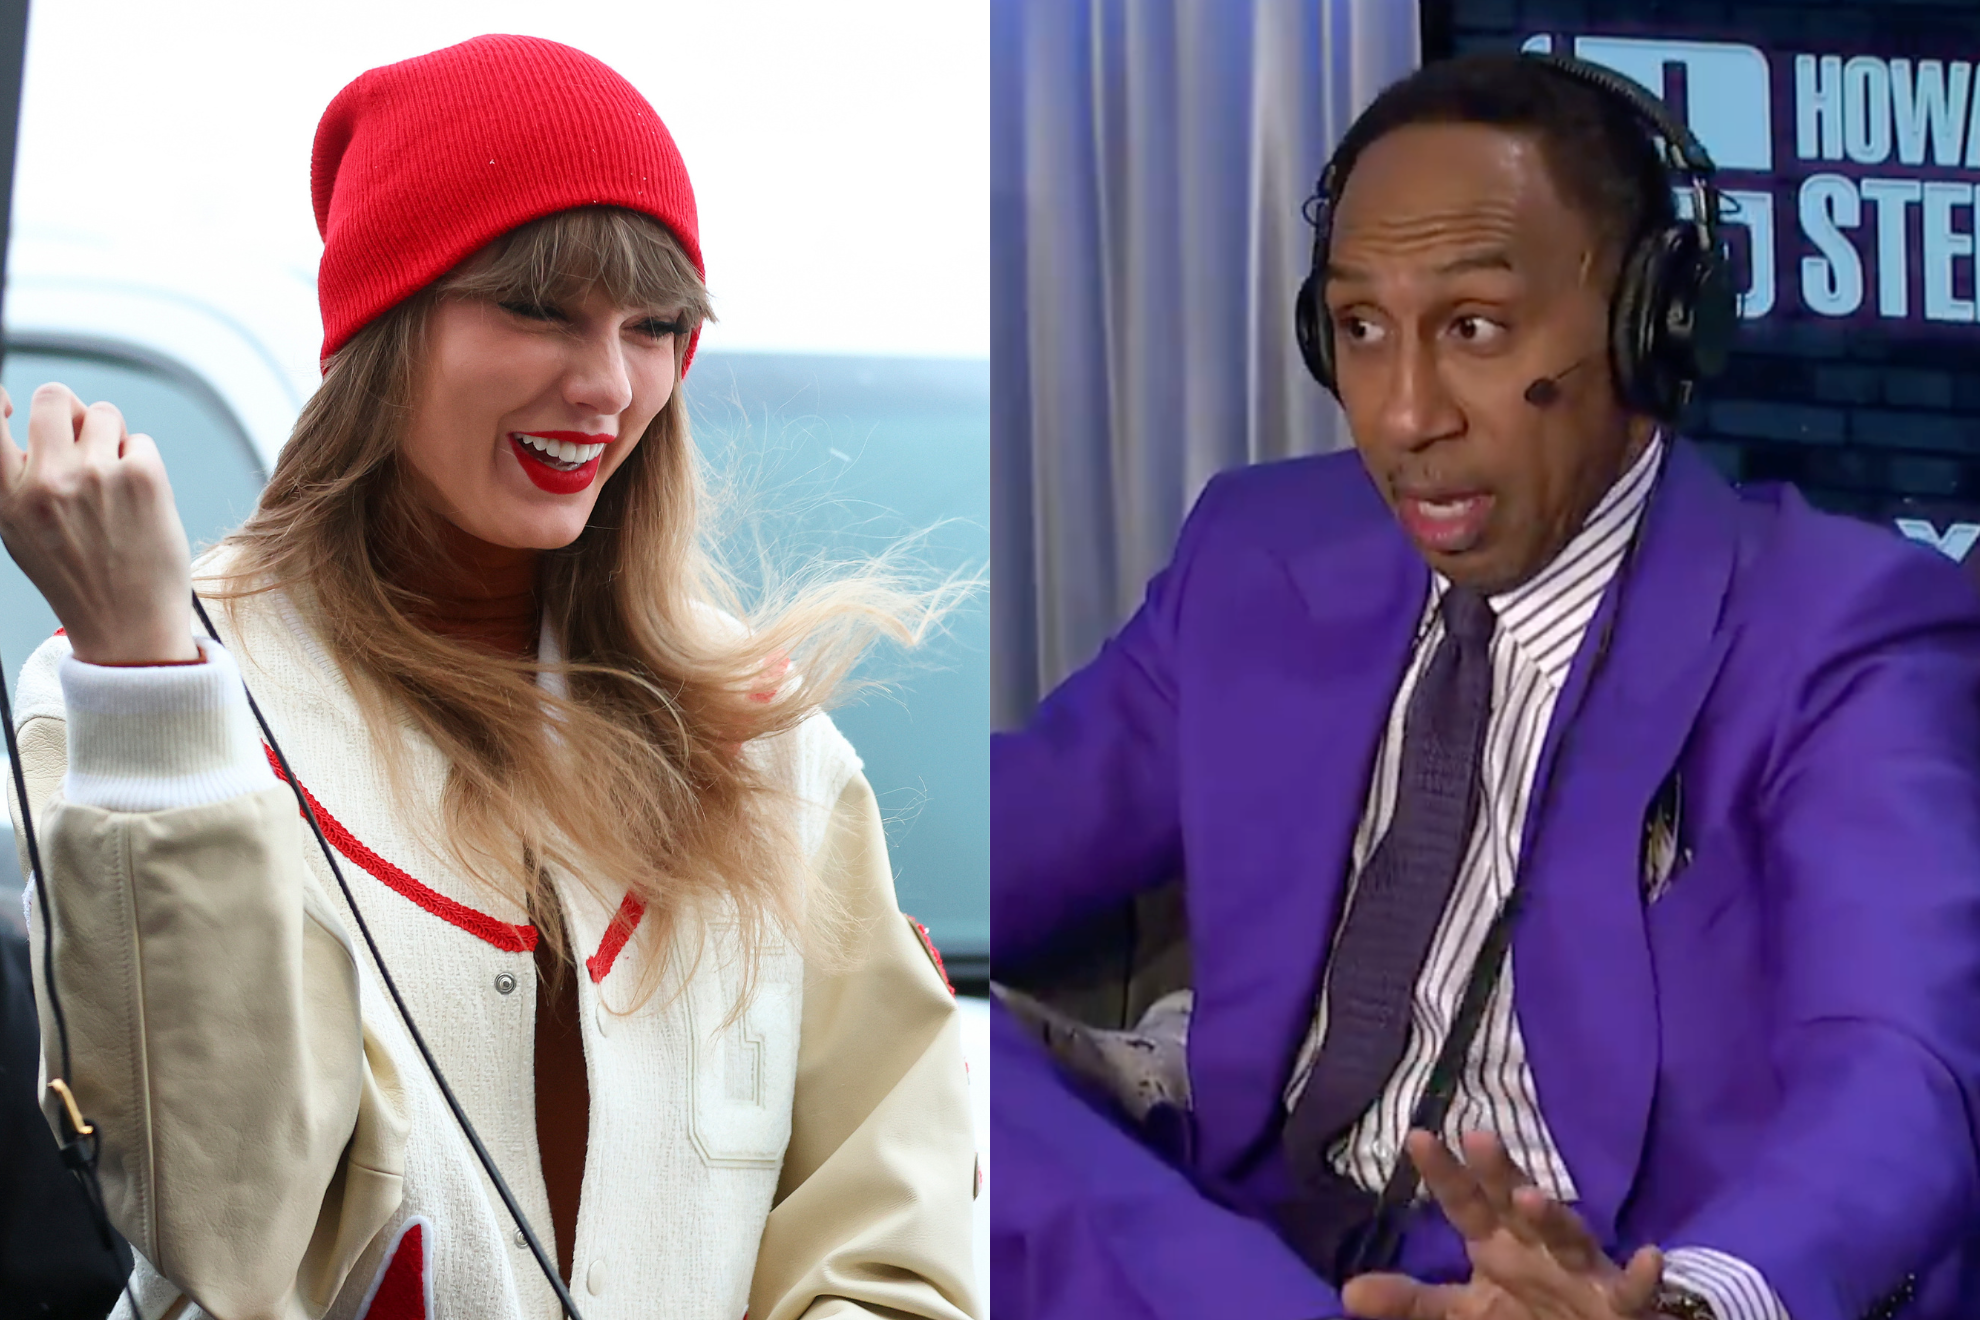 Taylor Swift impressed Stephen A. Smith during a concert.